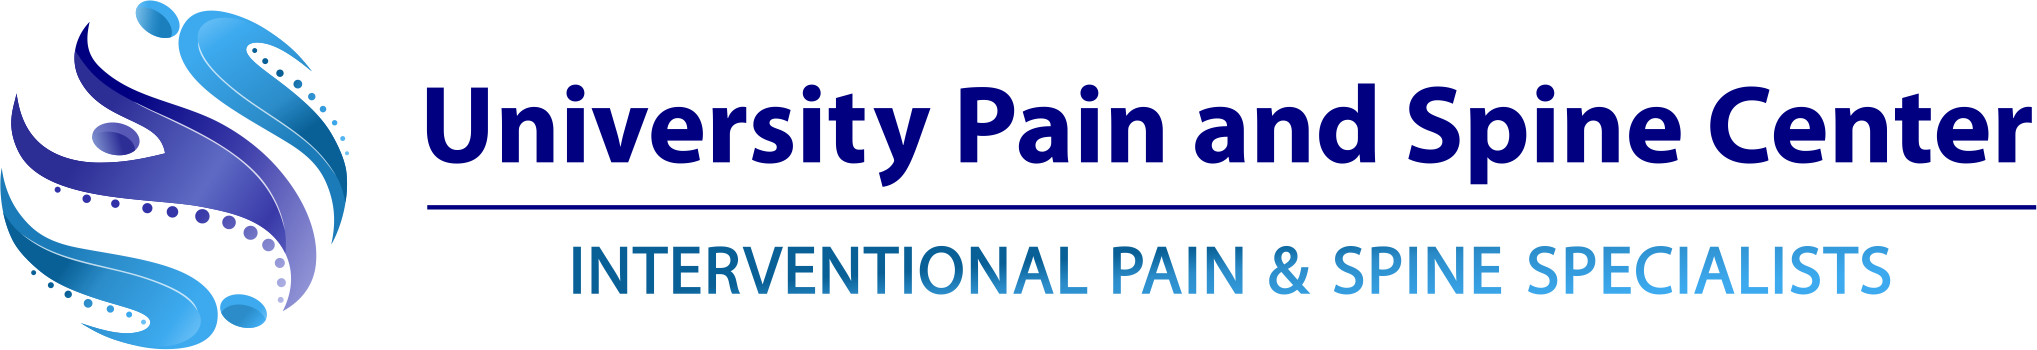 University Pain and Spine Center